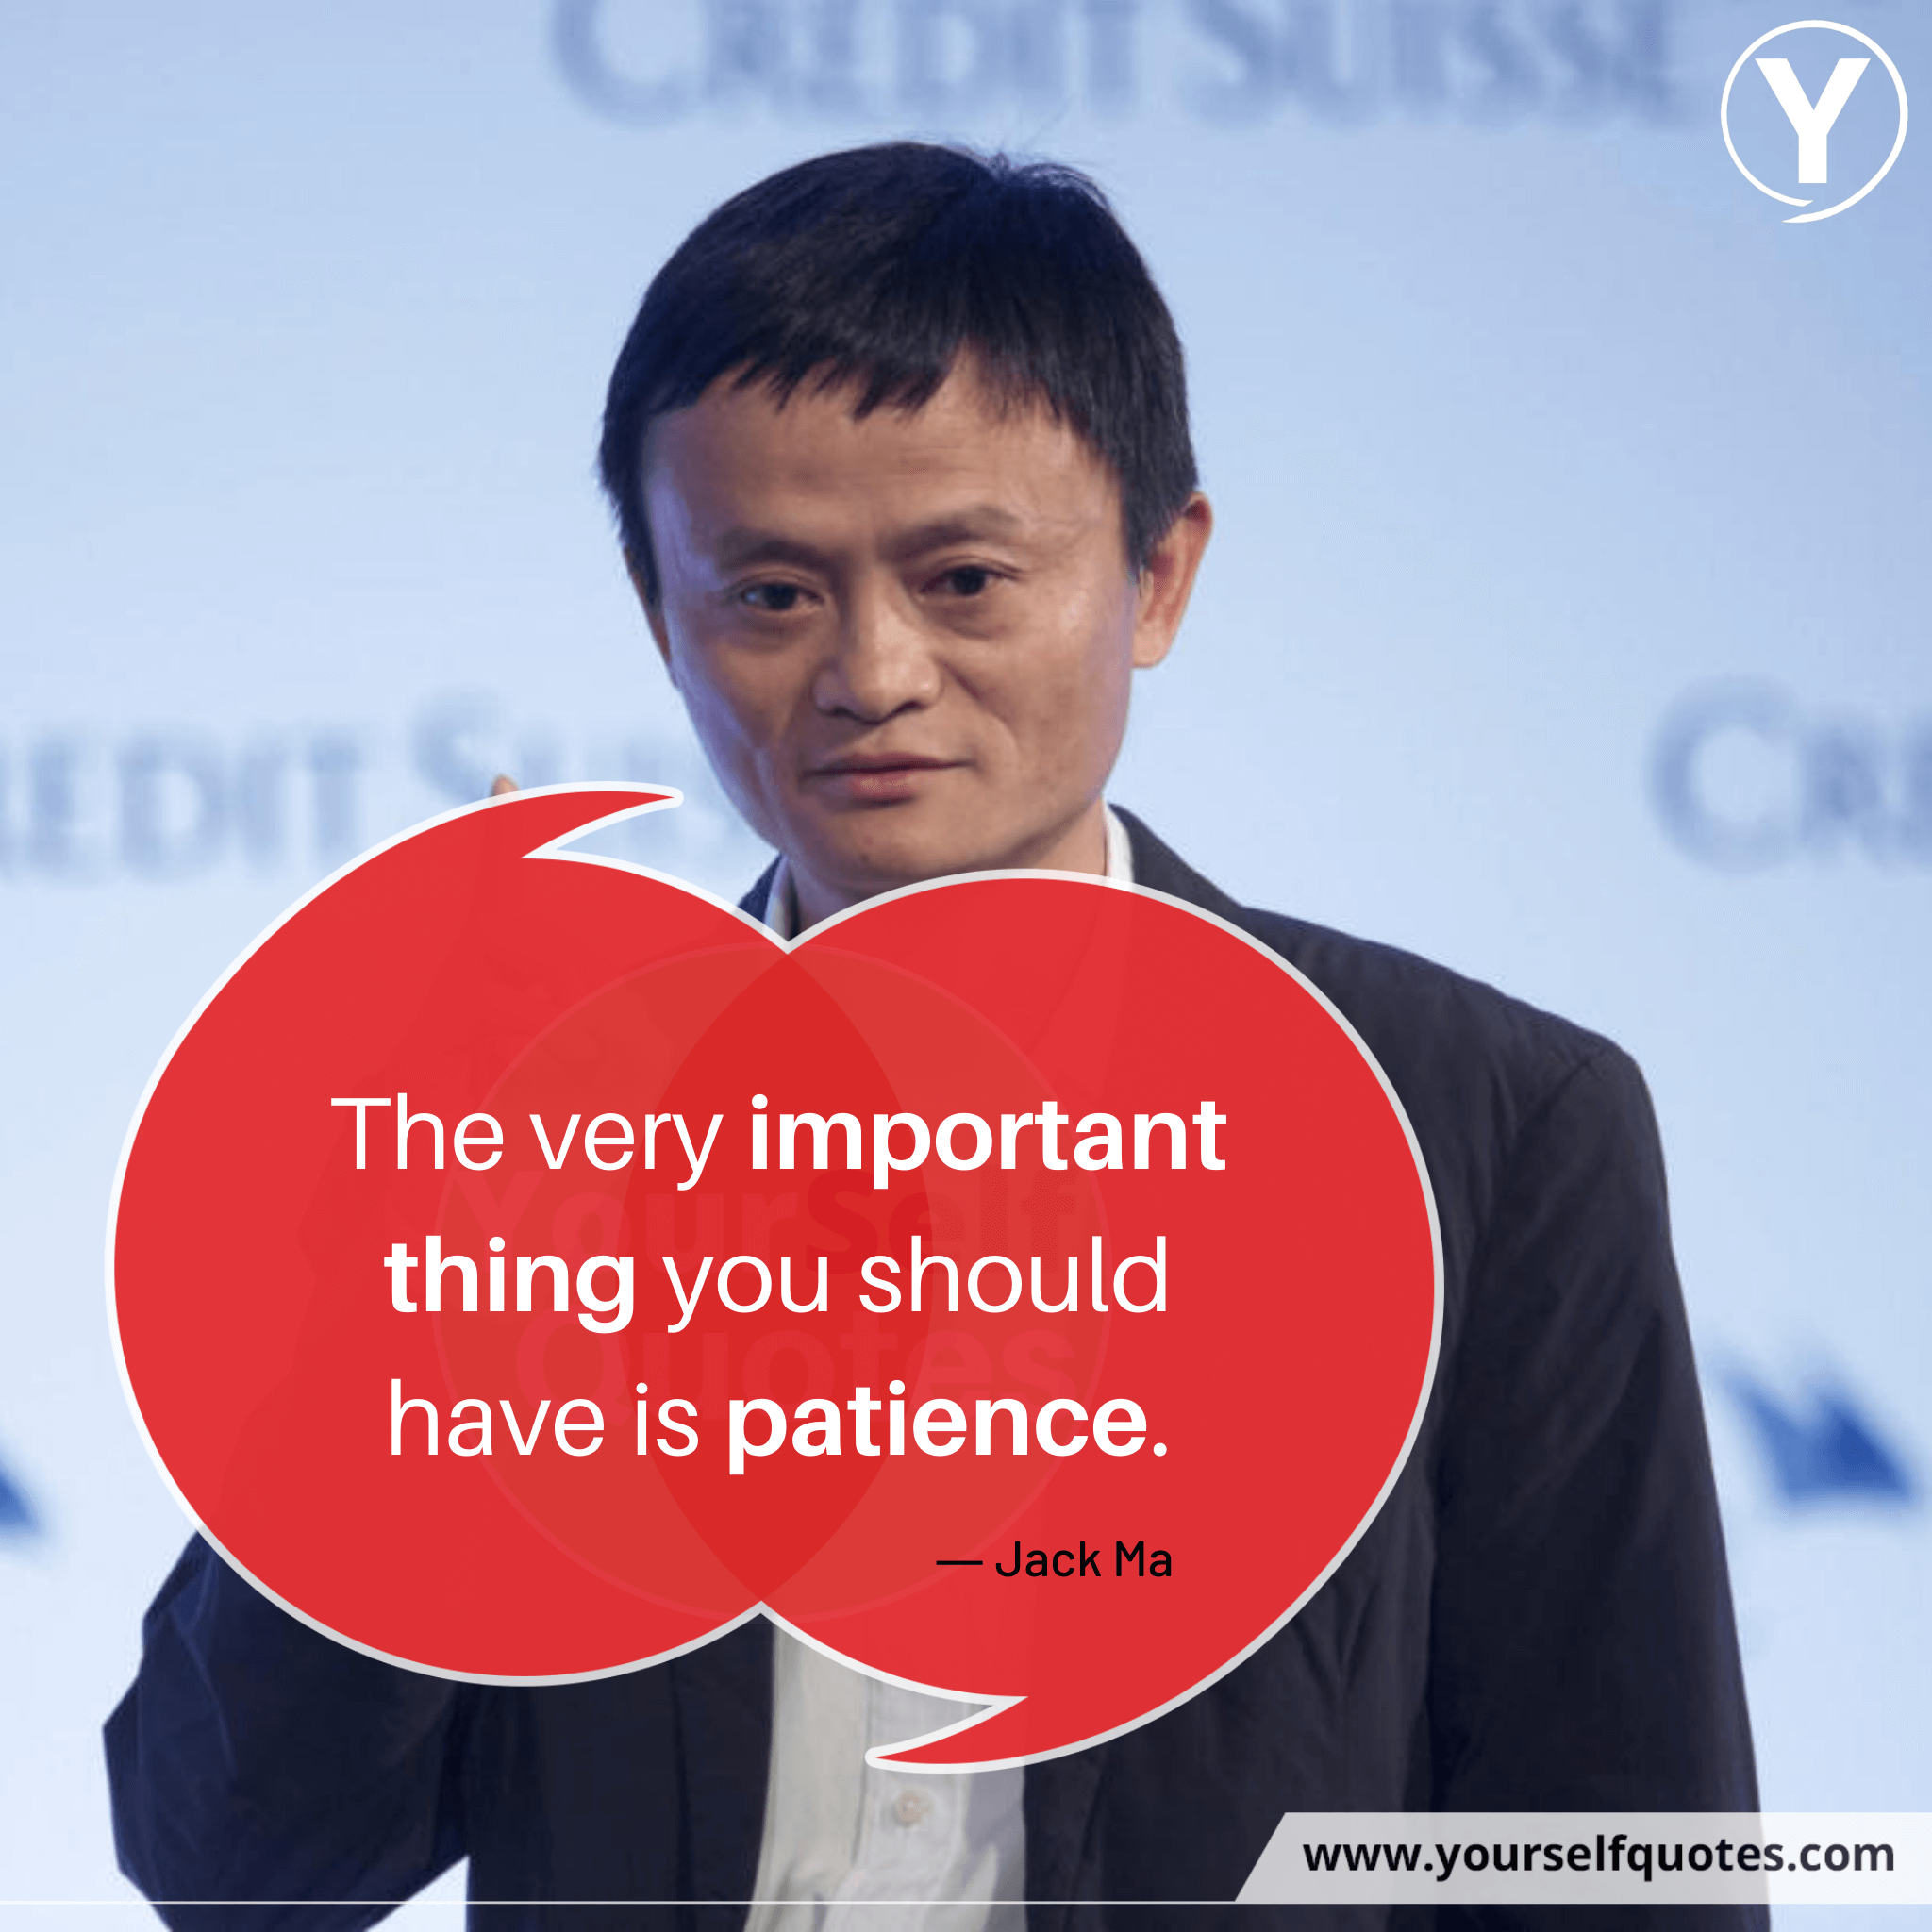 Motivational Jack Ma Quotes On Success